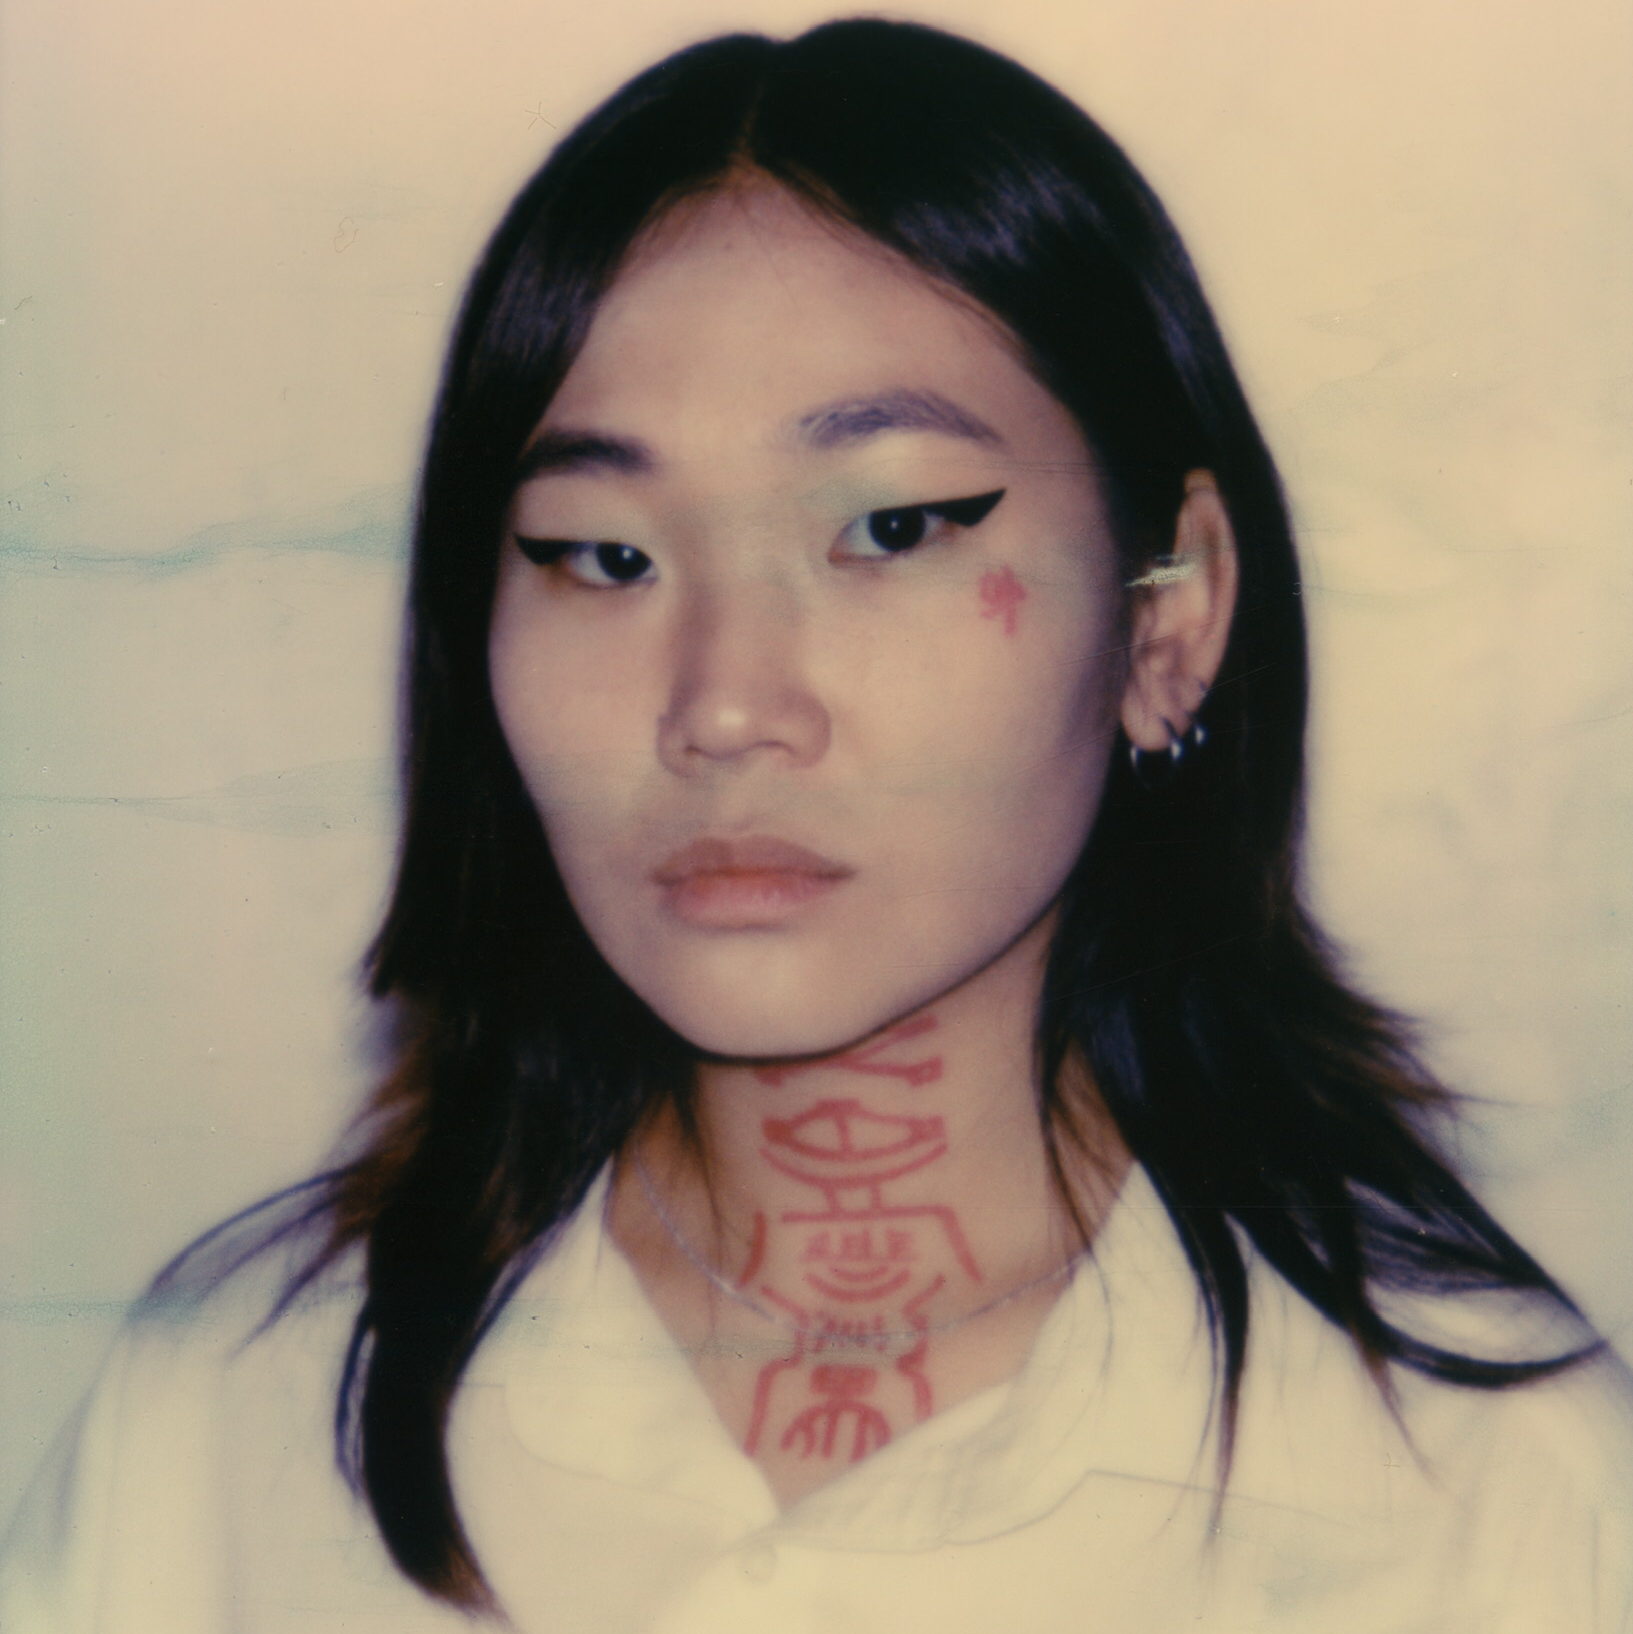 This image is of a young Korean woman of light/medium skin tone with dark hair and stark black eyeliner, she displays a red face and neck tattoo.